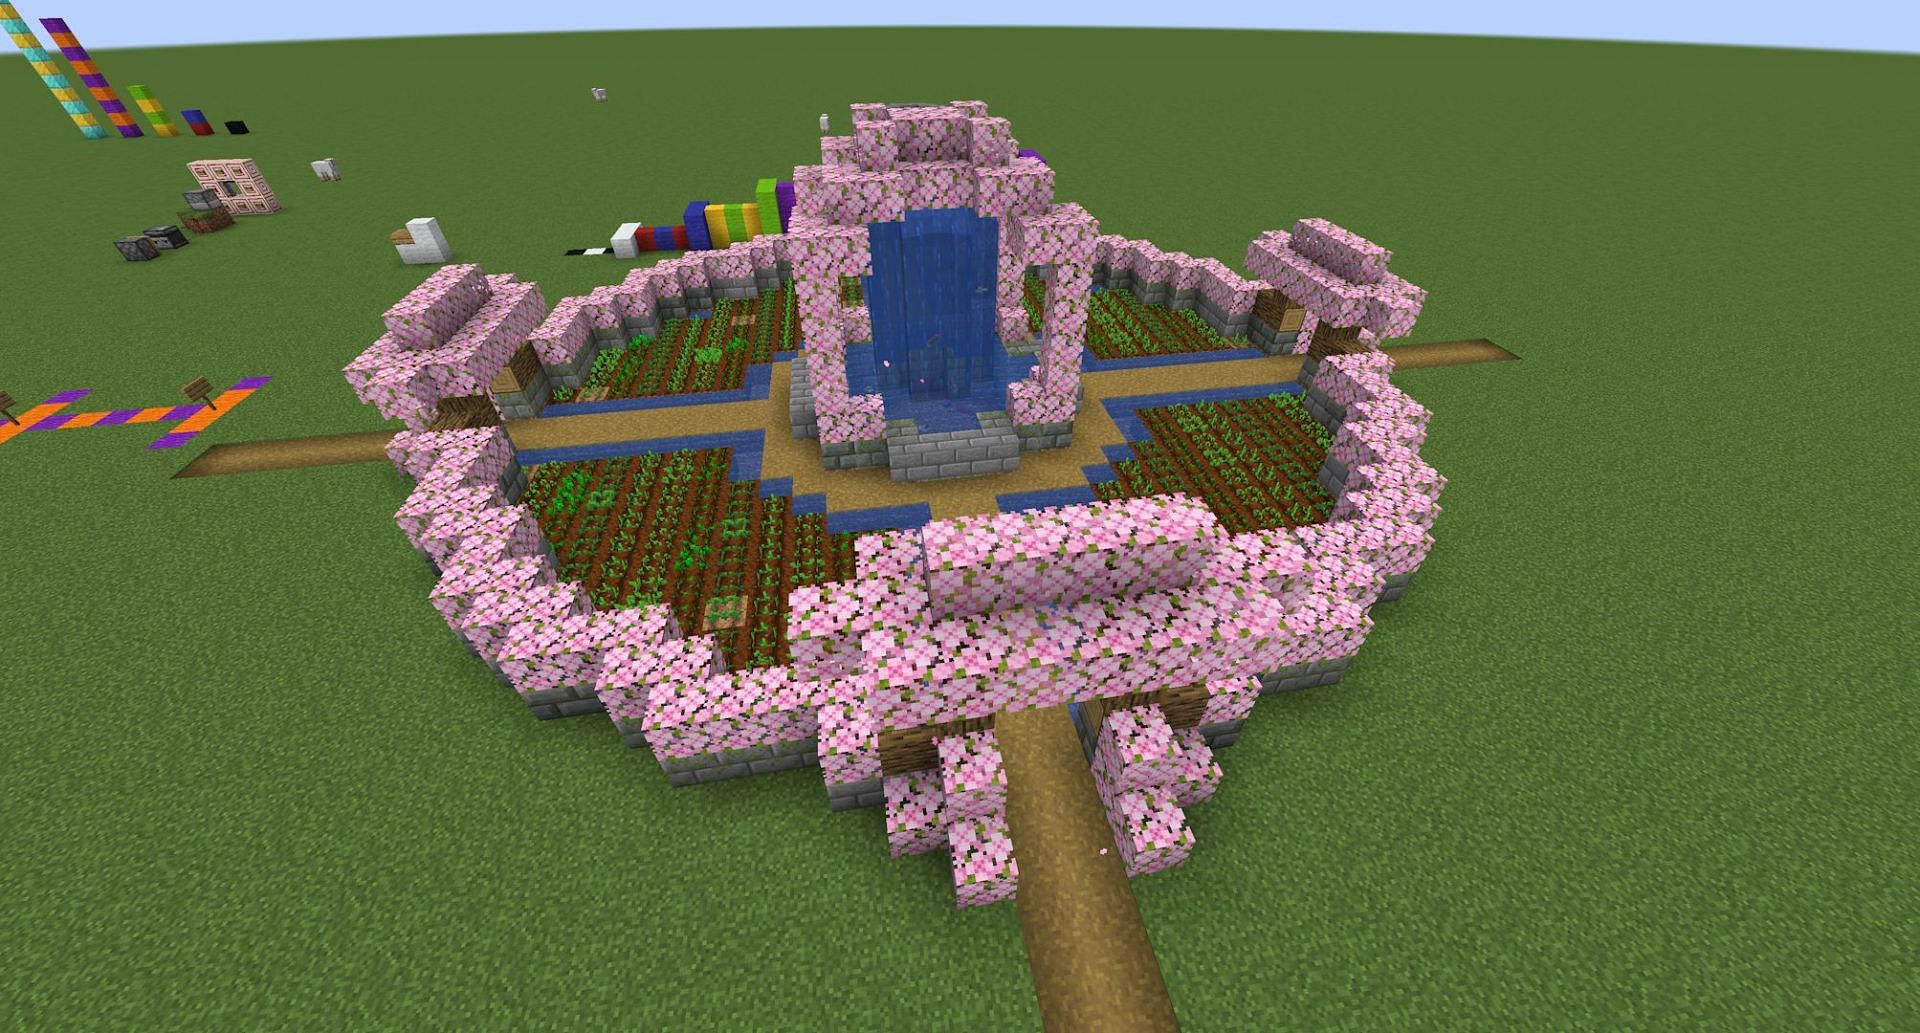 Example of a farm with a fountain centerpiece (Image from Mojang)